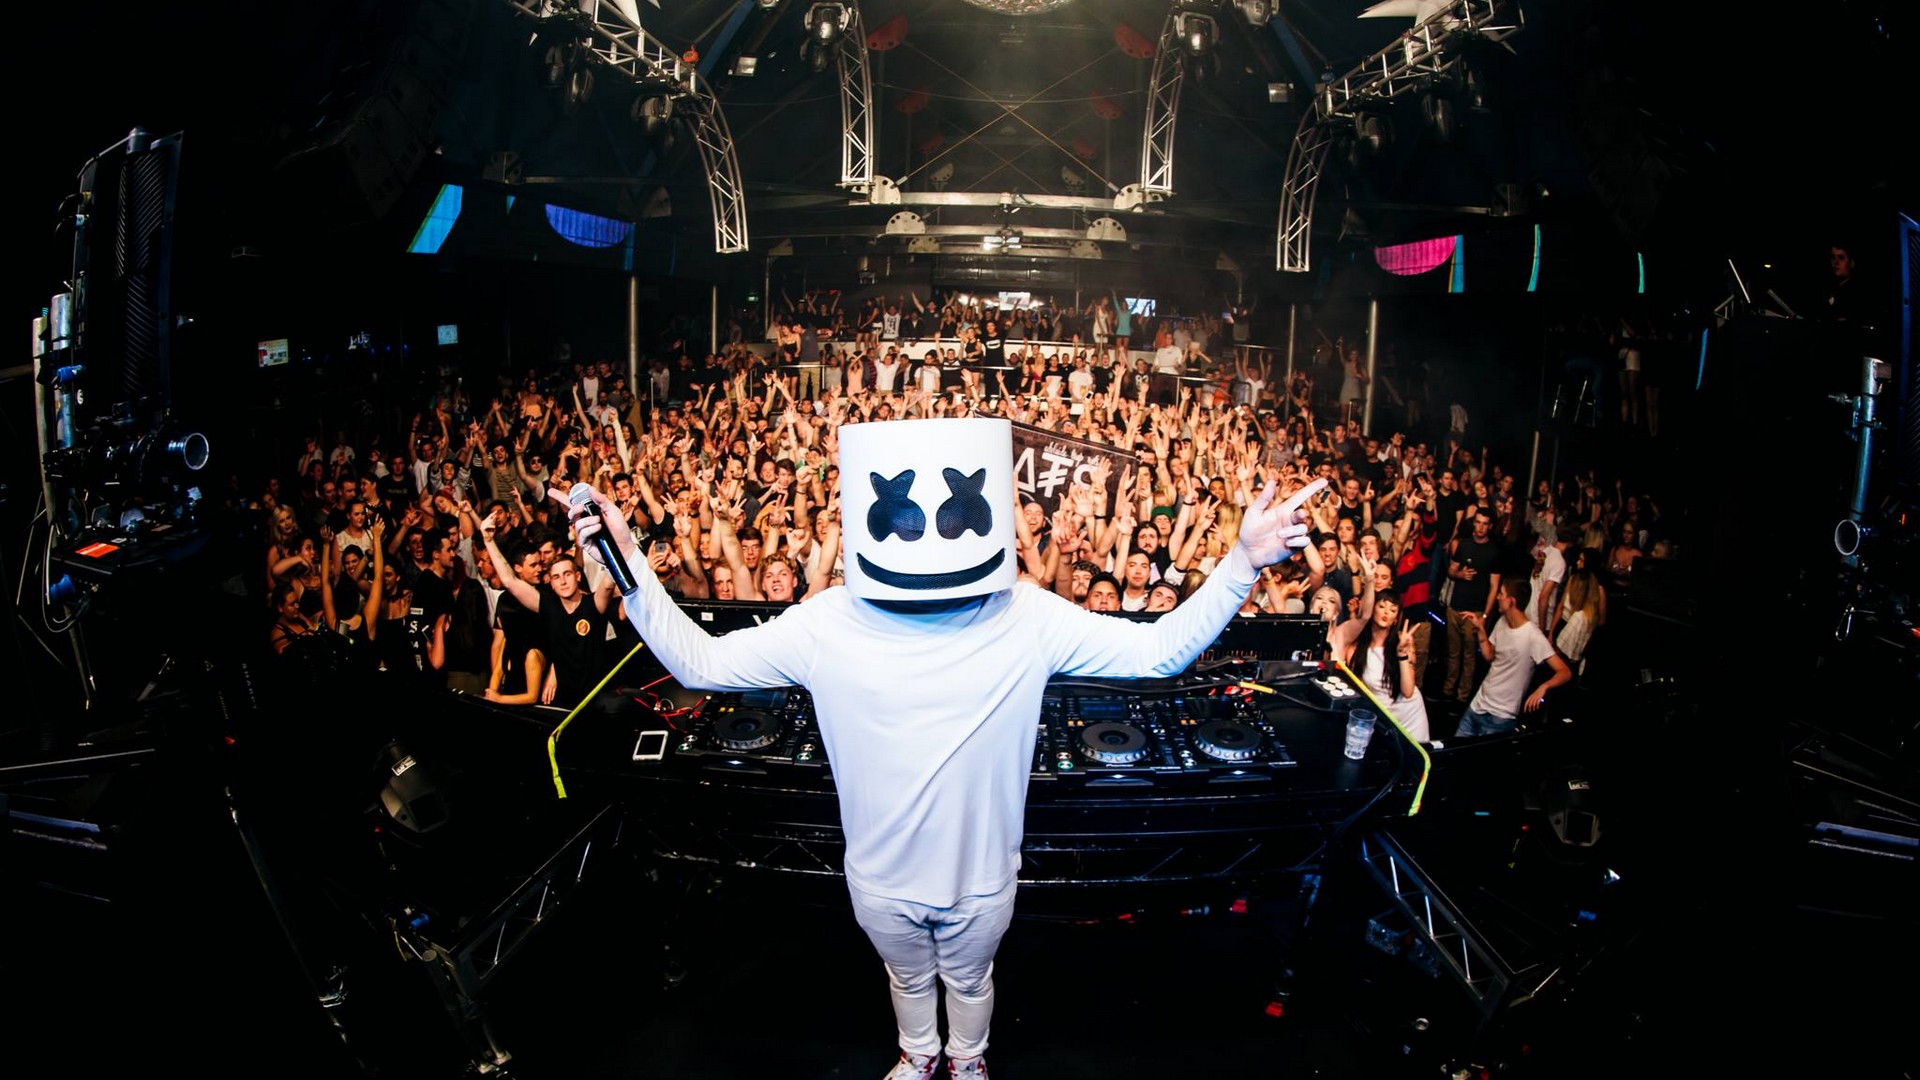 Wallpapers Computer Marshmello with high-resolution 1920x1080 pixel. You can use this wallpaper for your Desktop Computer Backgrounds, Mac Wallpapers, Android Lock screen or iPhone Screensavers and another smartphone device